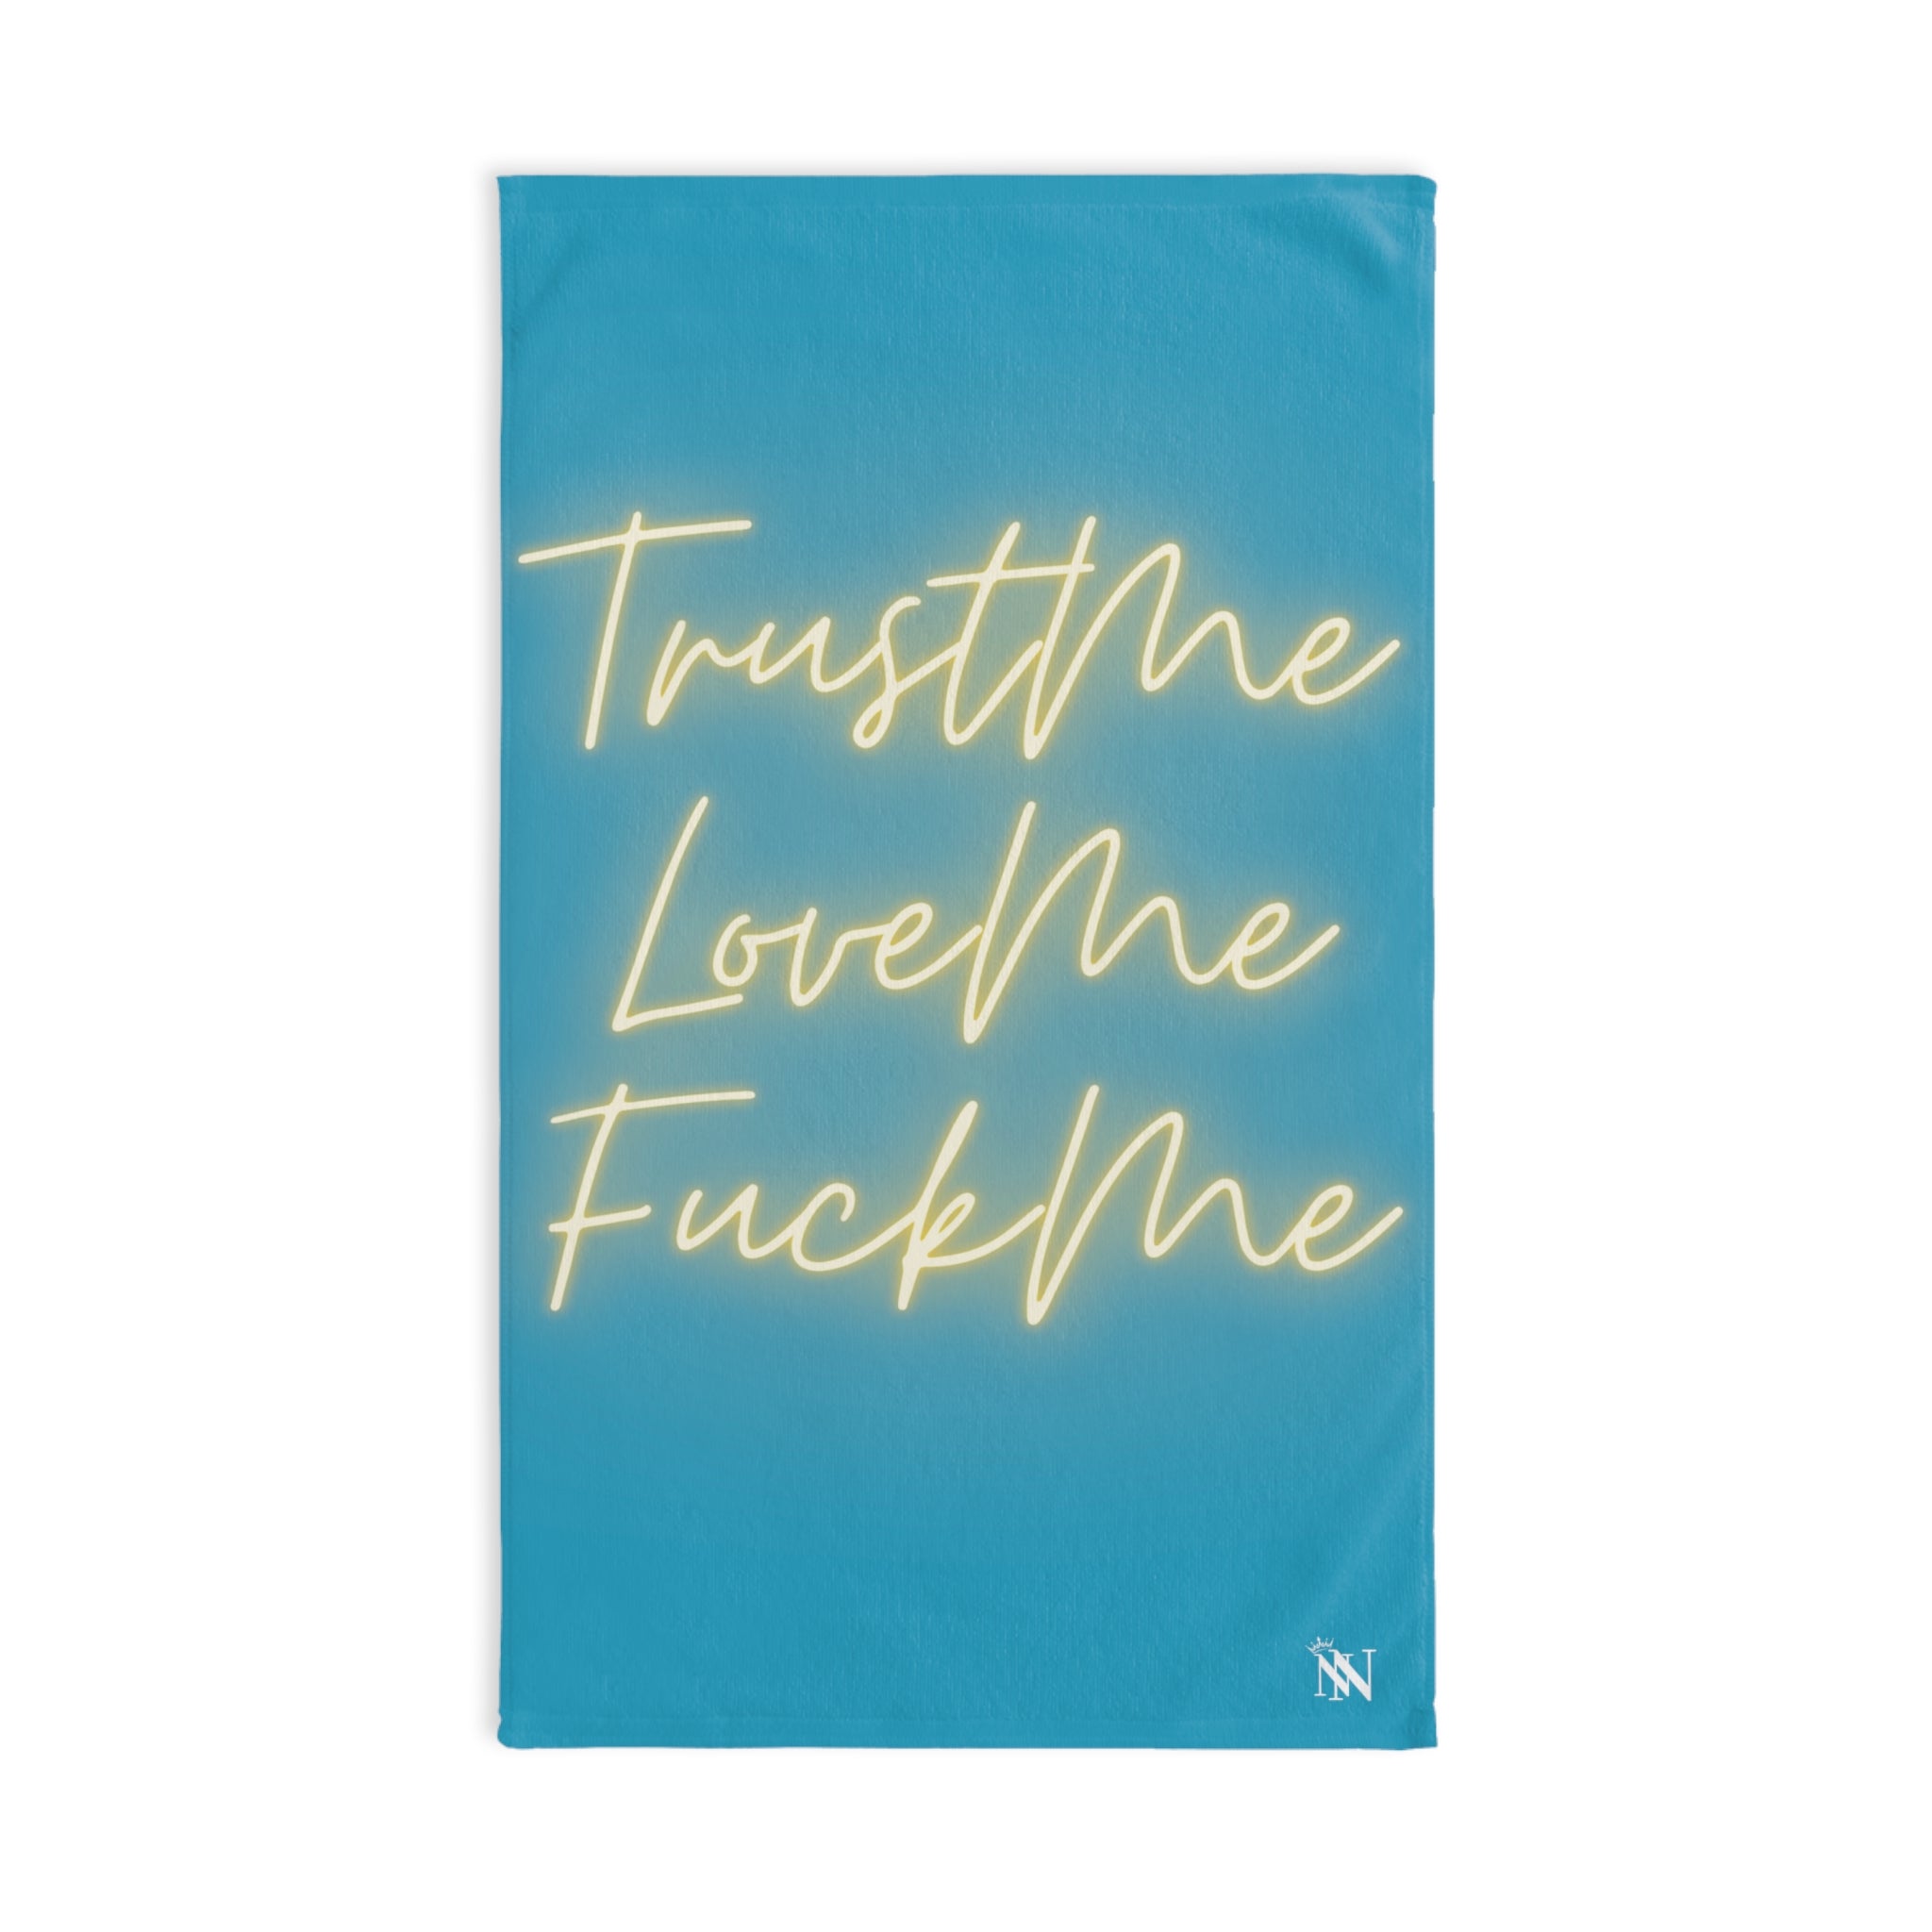 Trust Love F*ck Me Teal | Novelty Gifts for Boyfriend, Funny Towel Romantic Gift for Wedding Couple Fiance First Year Anniversary Valentines, Party Gag Gifts, Joke Humor Cloth for Husband Men BF NECTAR NAPKINS